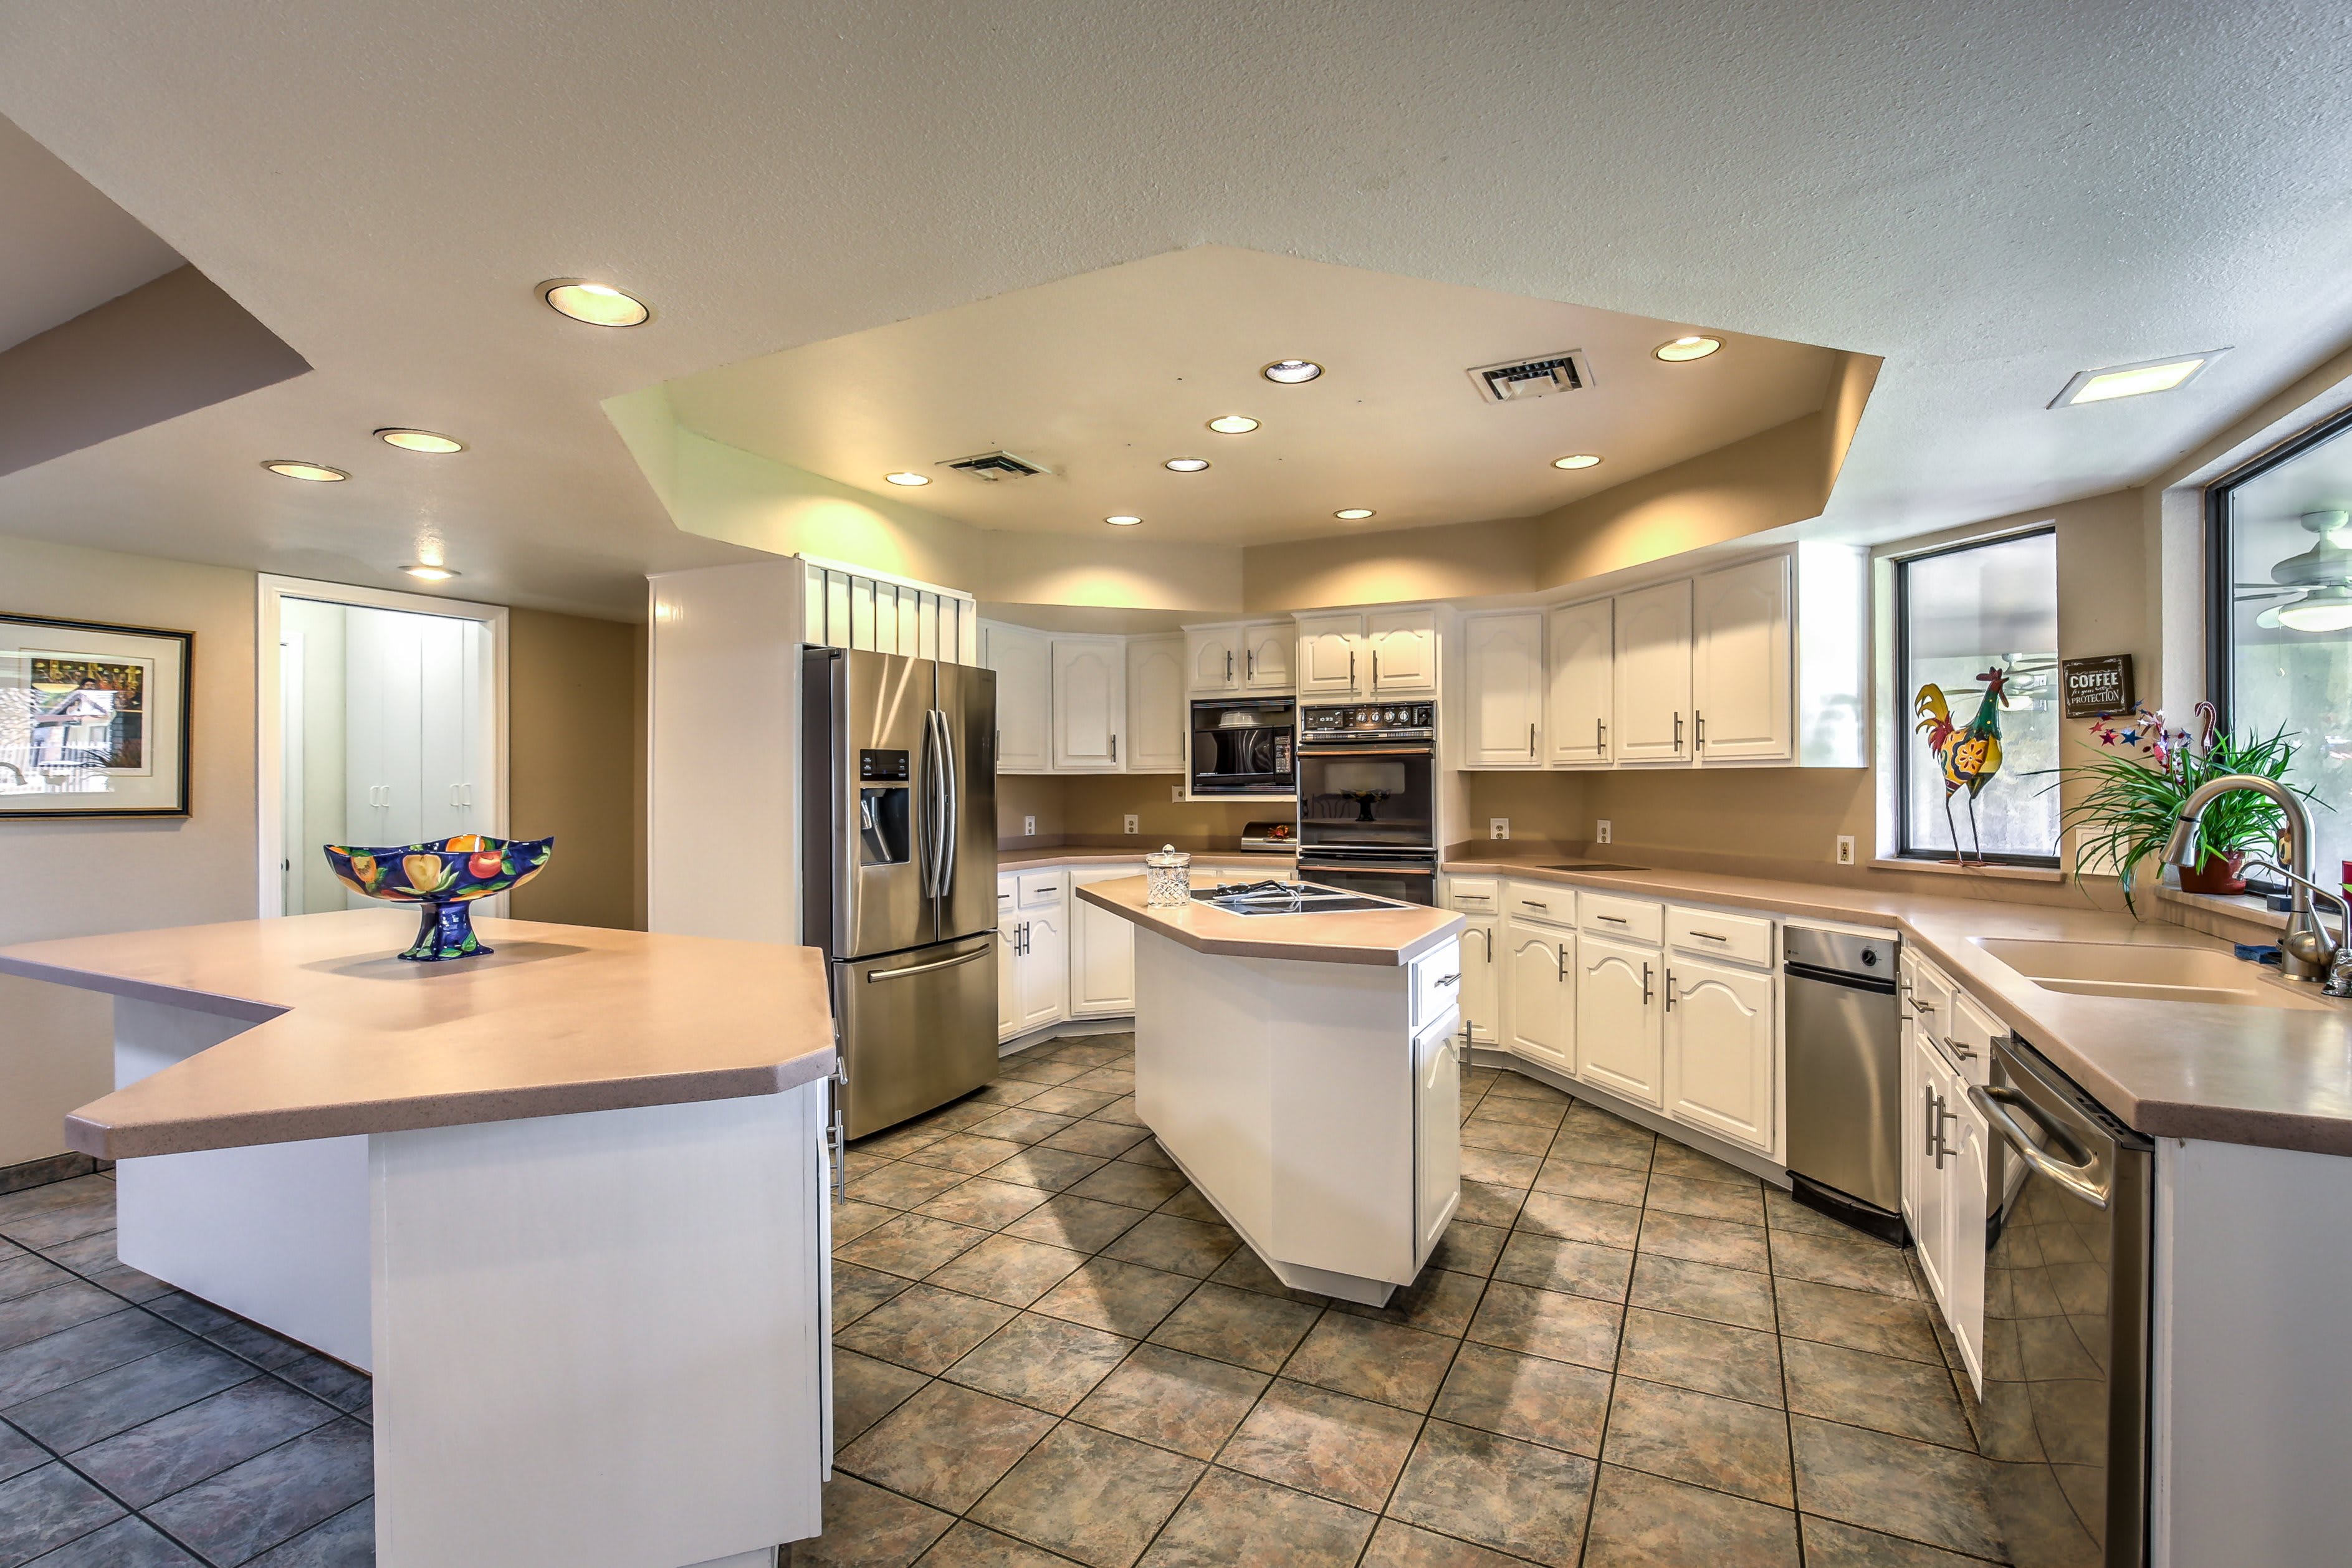 The Quail House Memory Care communal kitchen